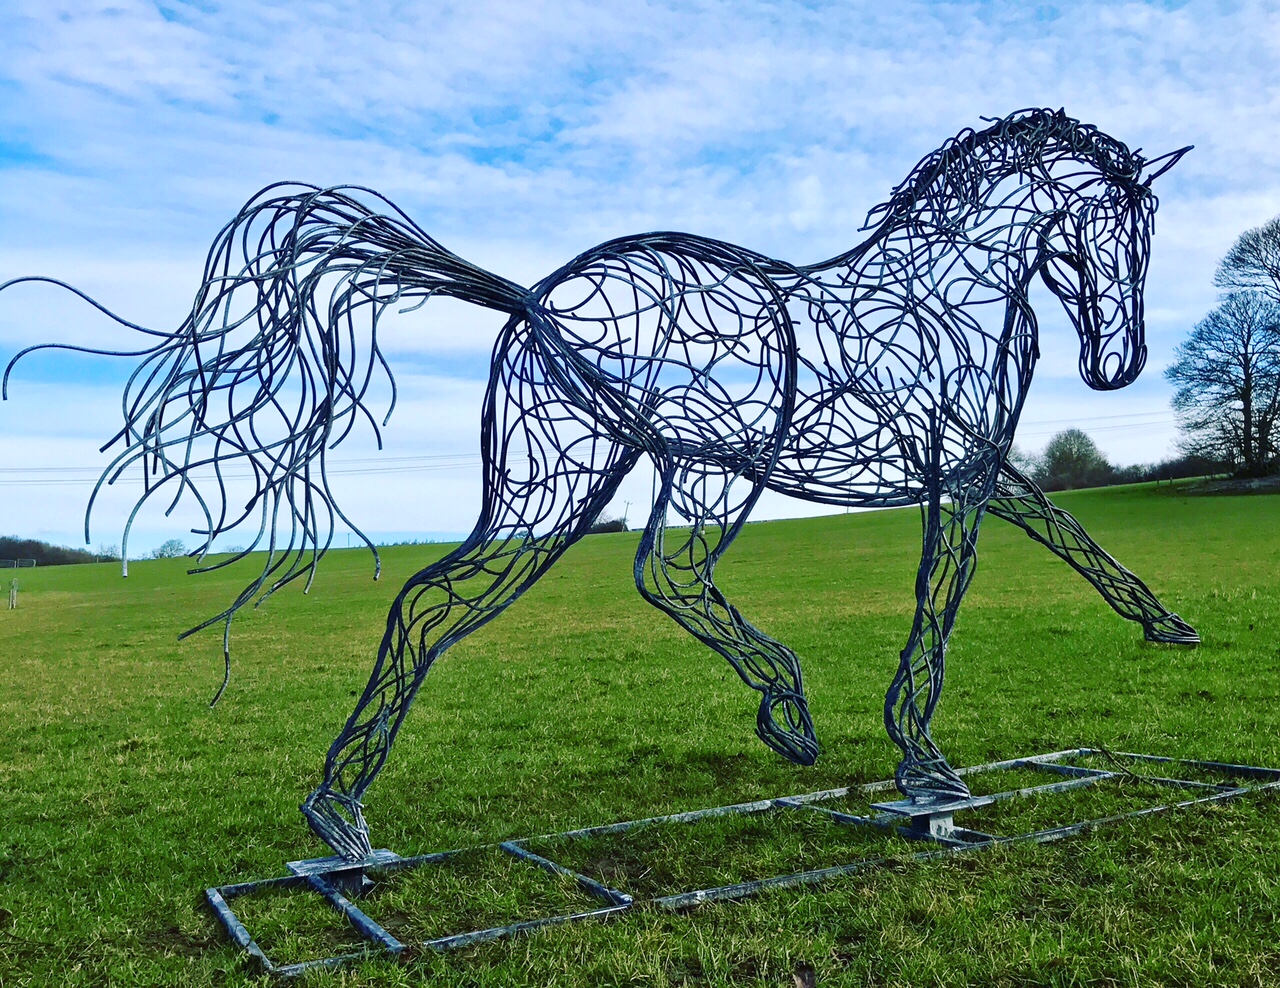 New Horse Sculpture is Unveiled